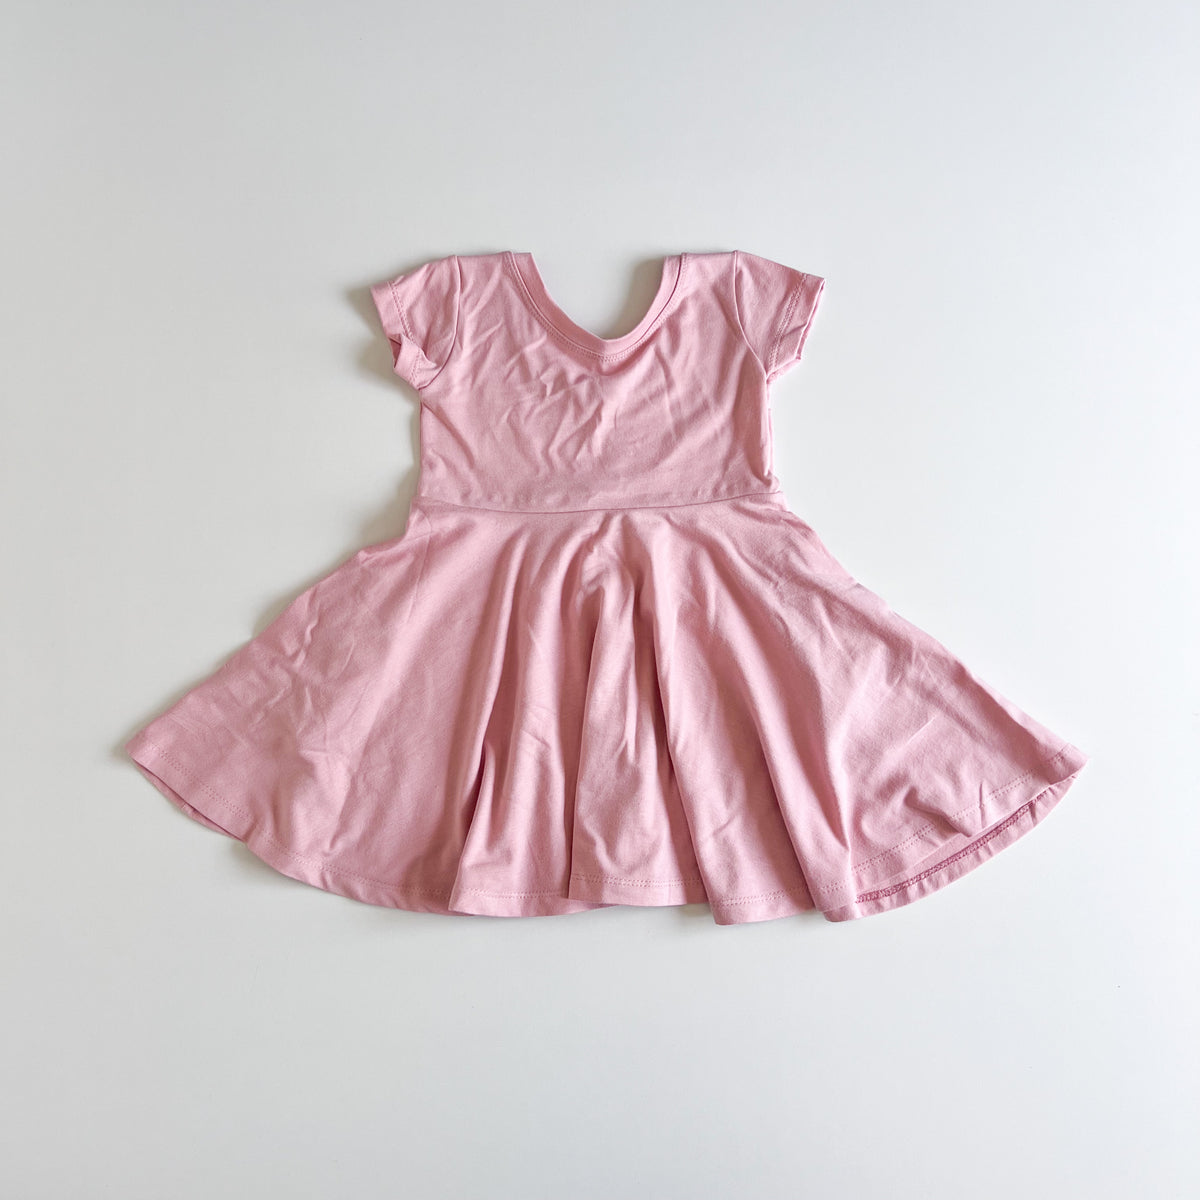 Elle Twirl Dress [Cap Sleeve] in 'Sunset Pink' - Ready To Ship